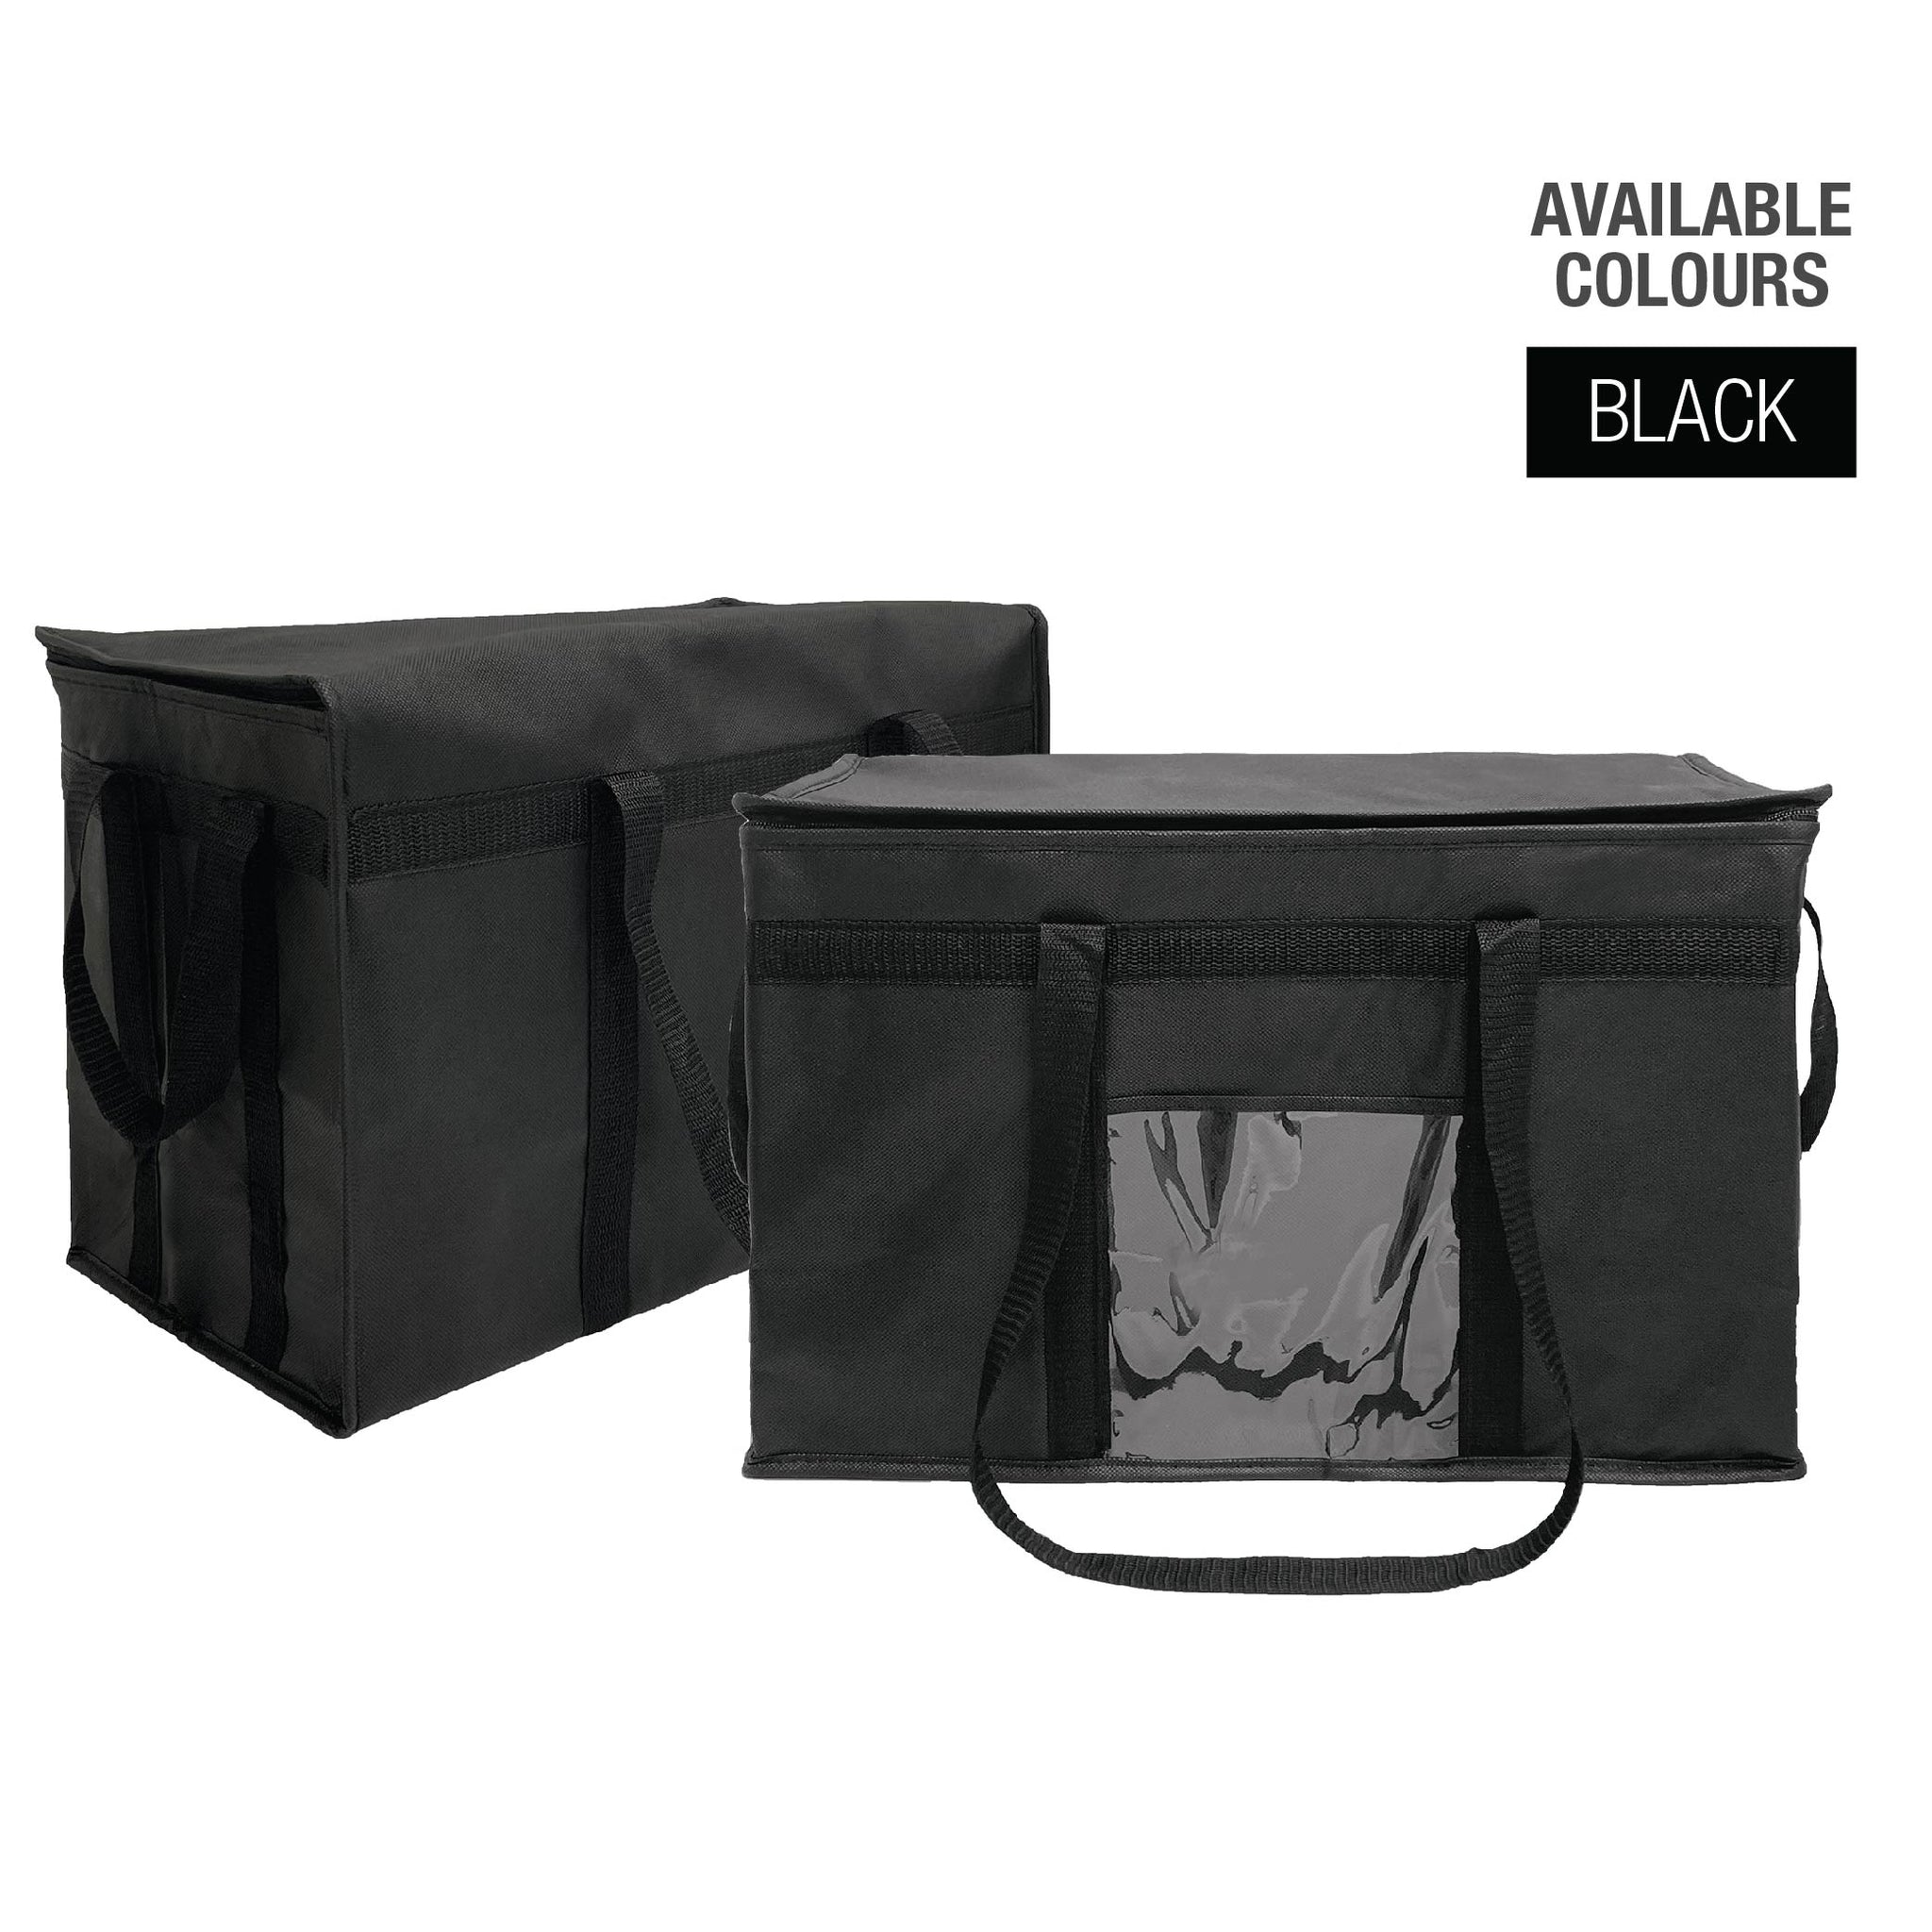 Jumbo Thermal / Insulated Food Delivery Bag with Extra 2 Sides Handle Bulk 10 pcs / Pack - 20"W x 10"D x 13"H - 2.5mm insulation